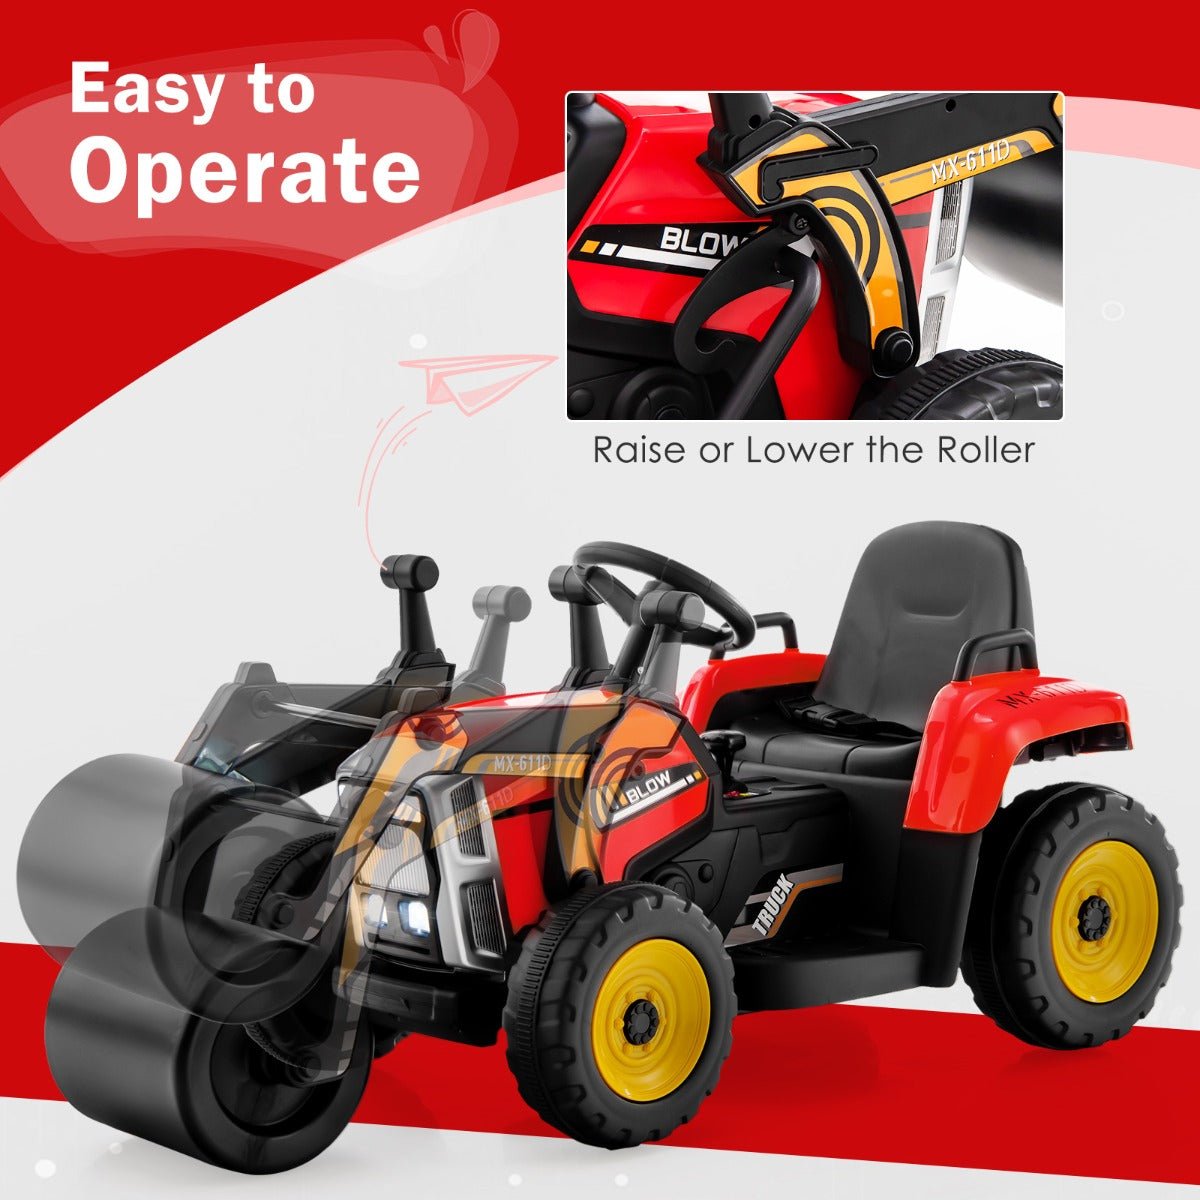 Experience Joy with the Red 12V Kids Road Roller - Shop Today!